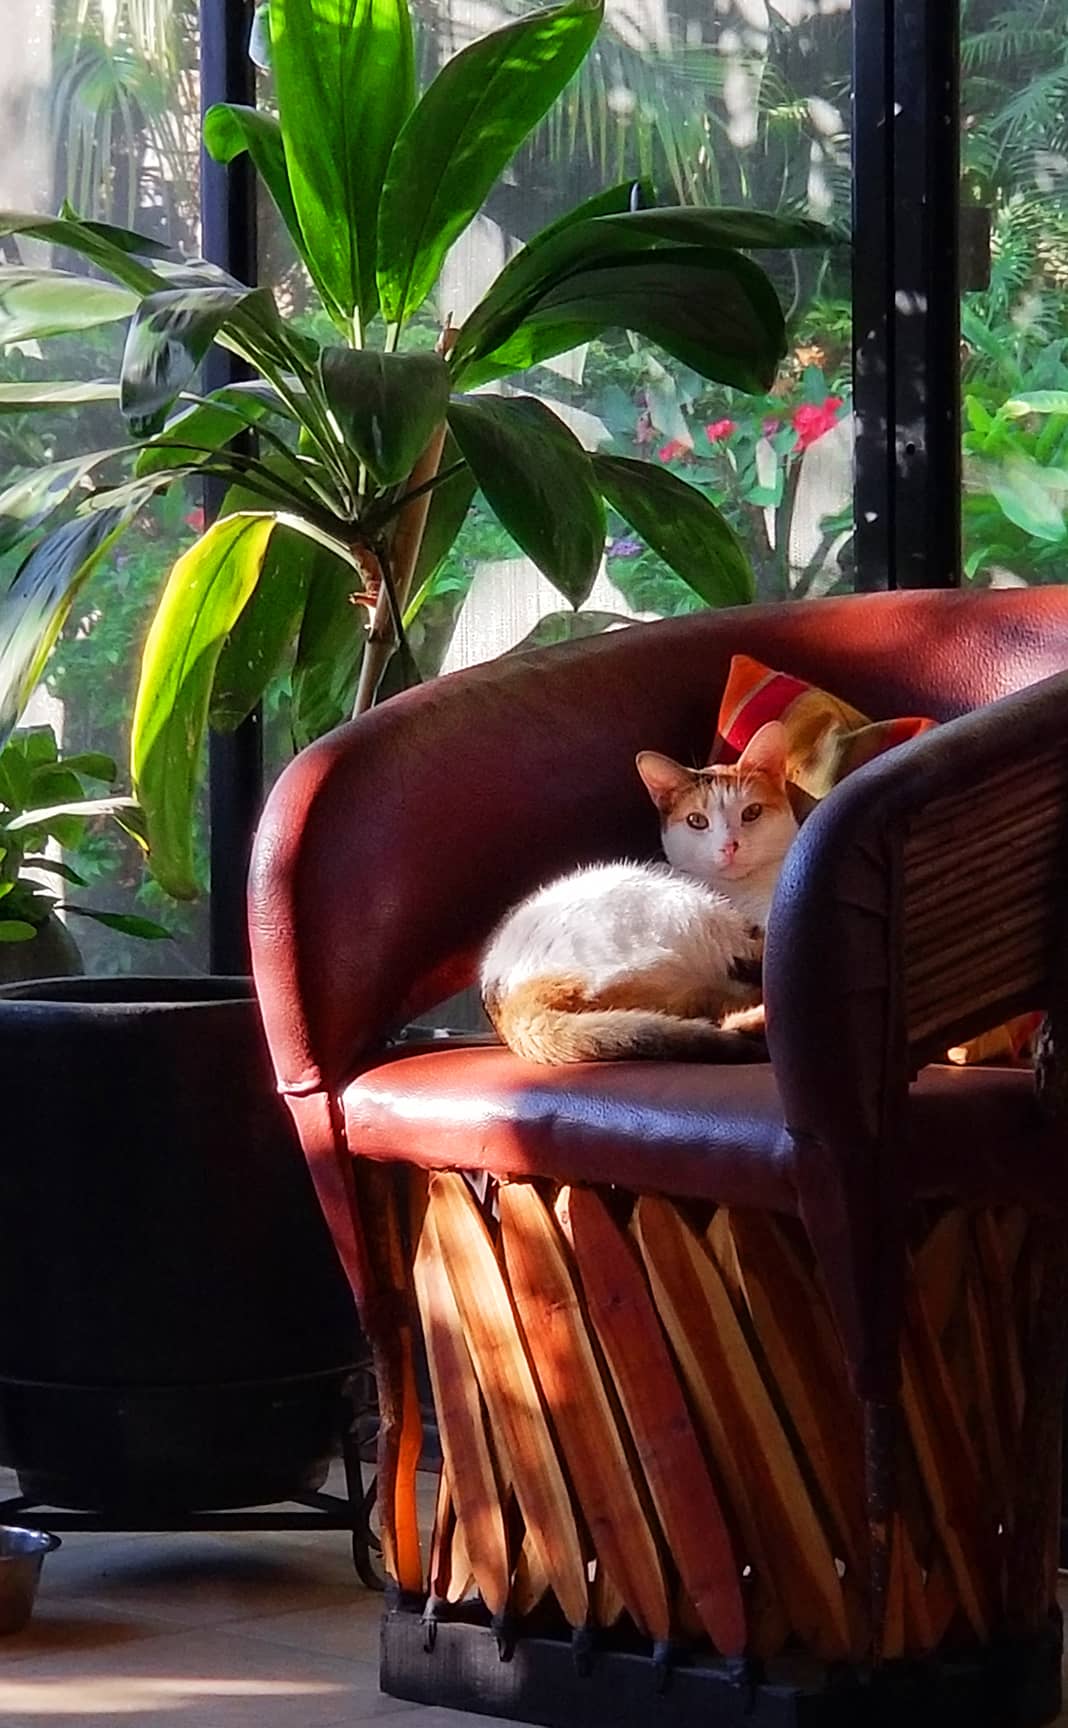 Stella cat napping in a pig skin chair in the garden